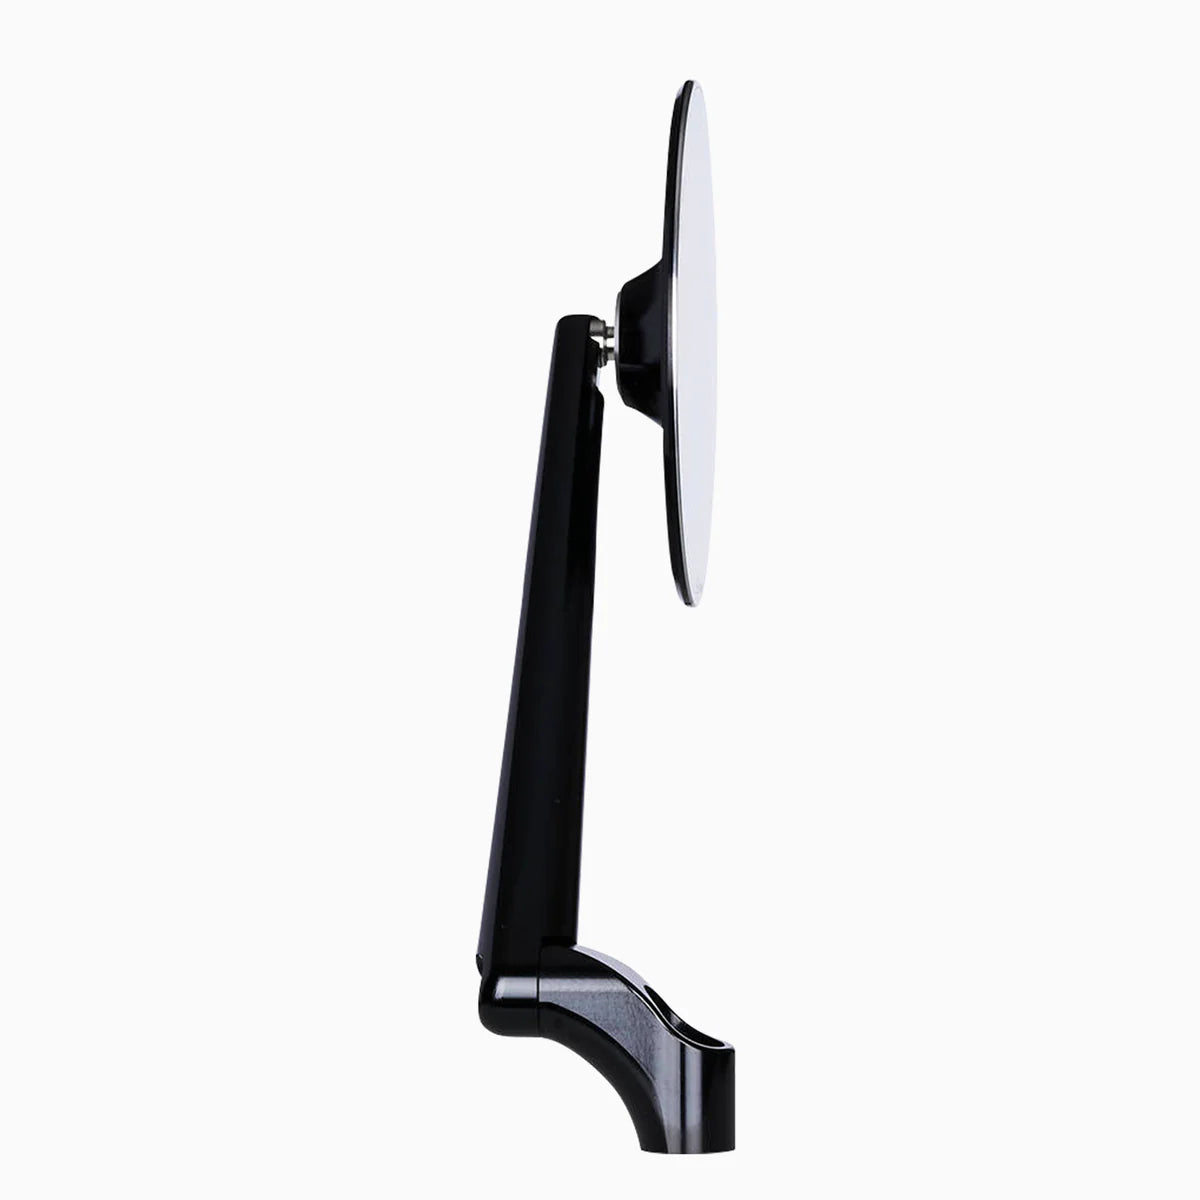 Motogadget Mo.view classic motorcycle rear-view mirror